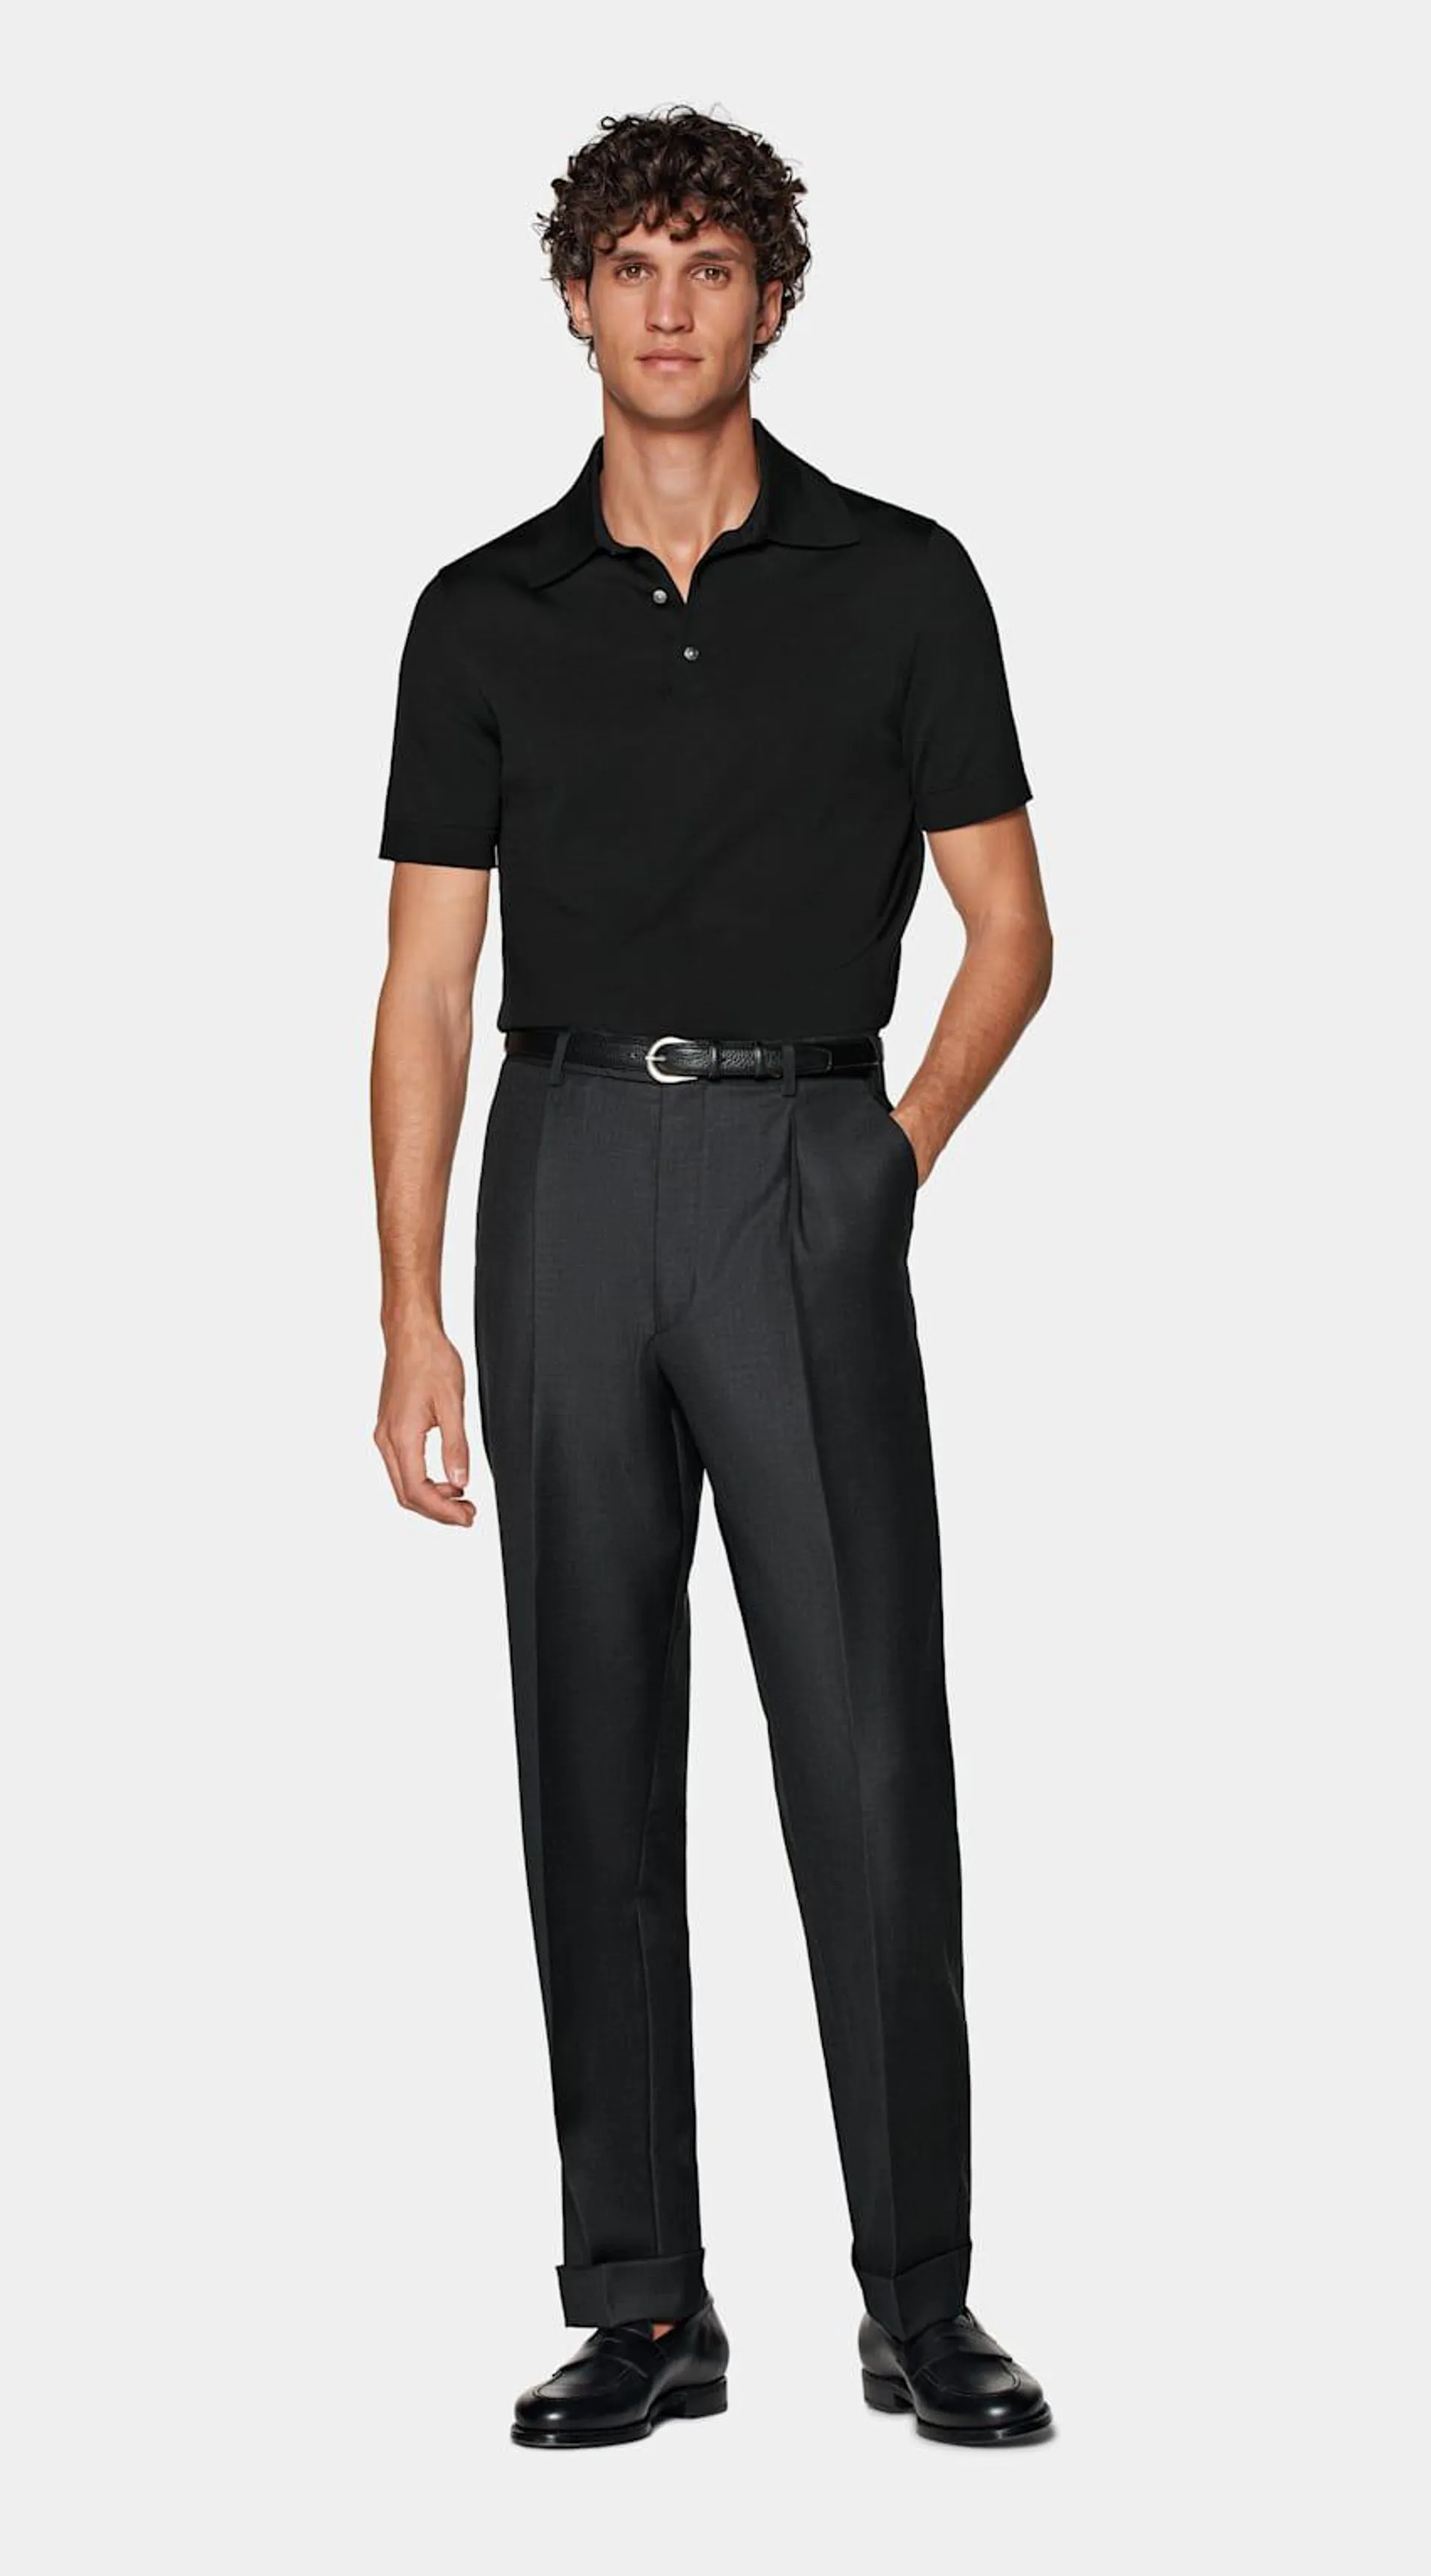 Boasting a soft collar, lustrous mother of pearl buttons, and ribbed detailing, this black slim fit polo is tailored for a comfortable yet elevated look.